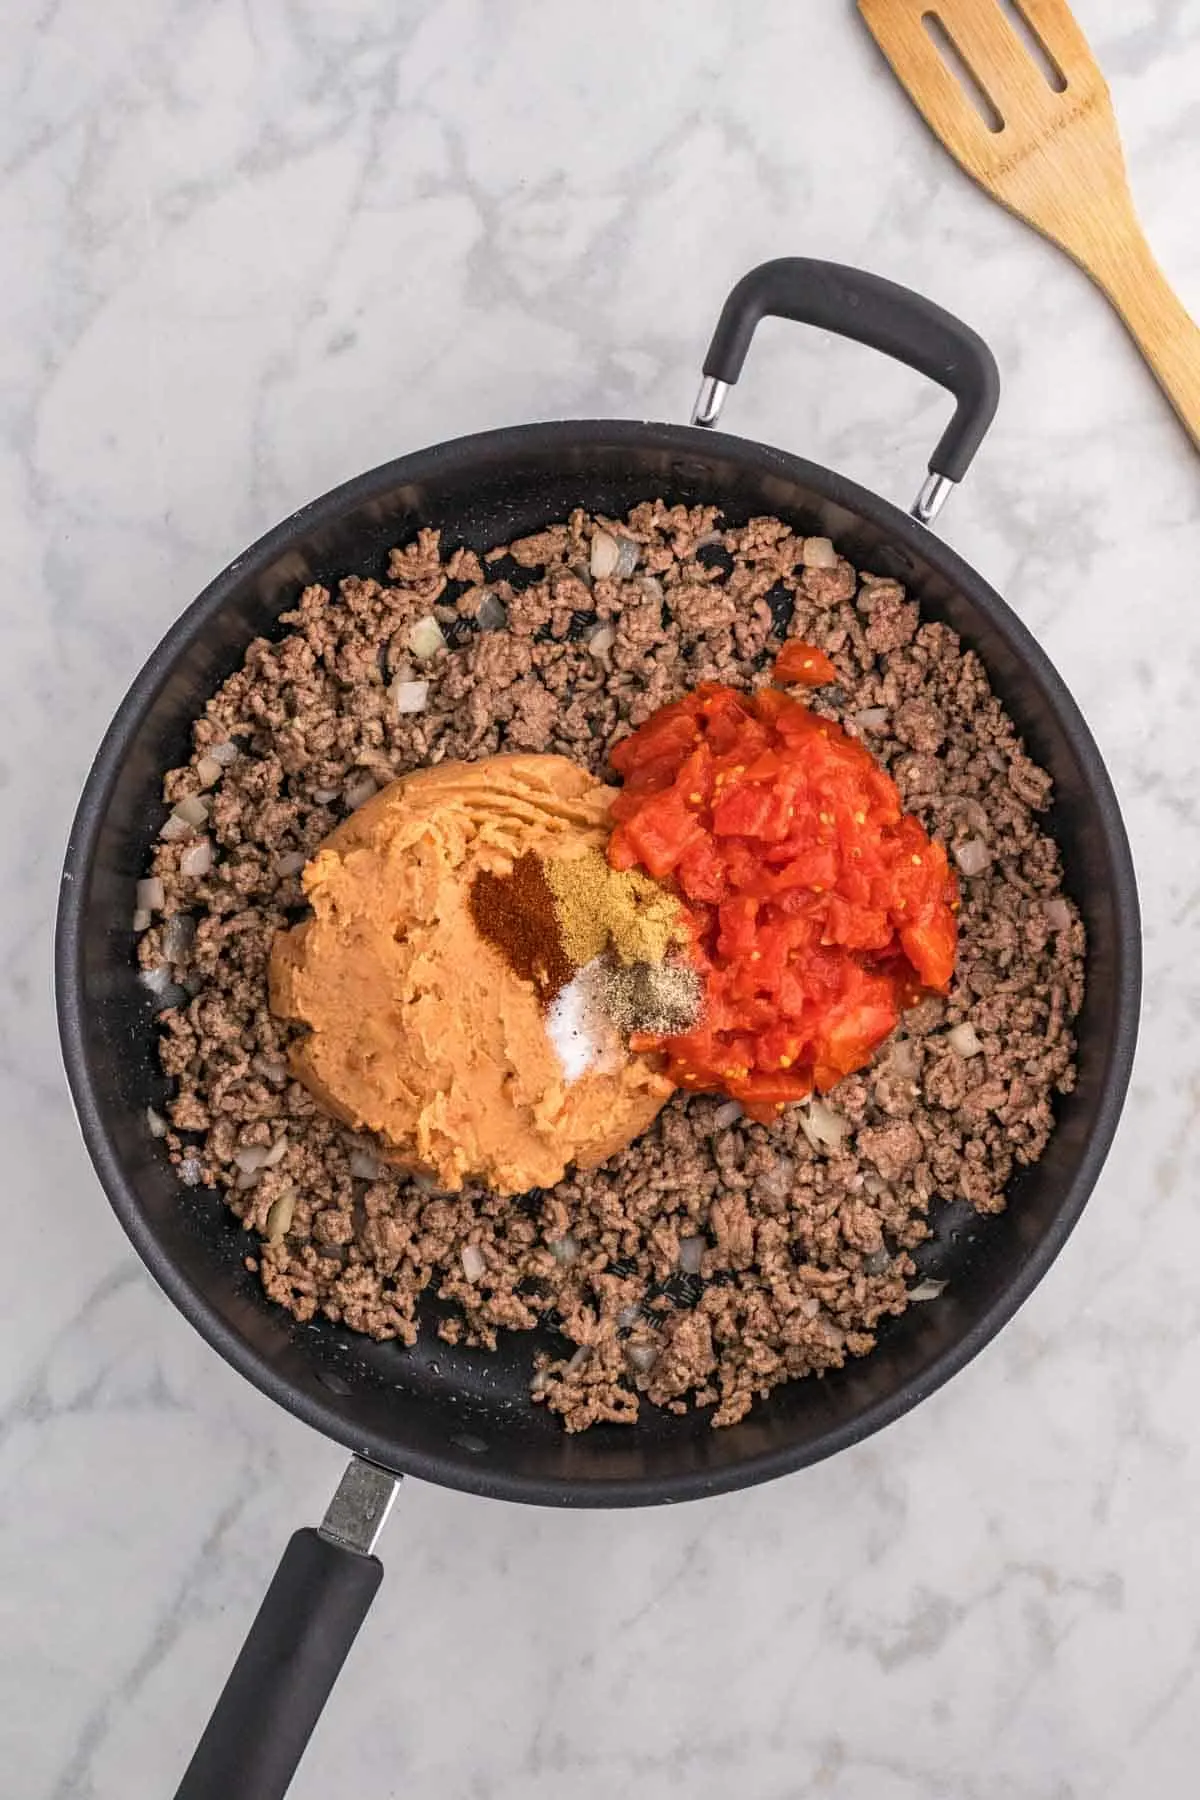 spices, refried beans and diced tomatoes on top of cooked ground beef in a skillet